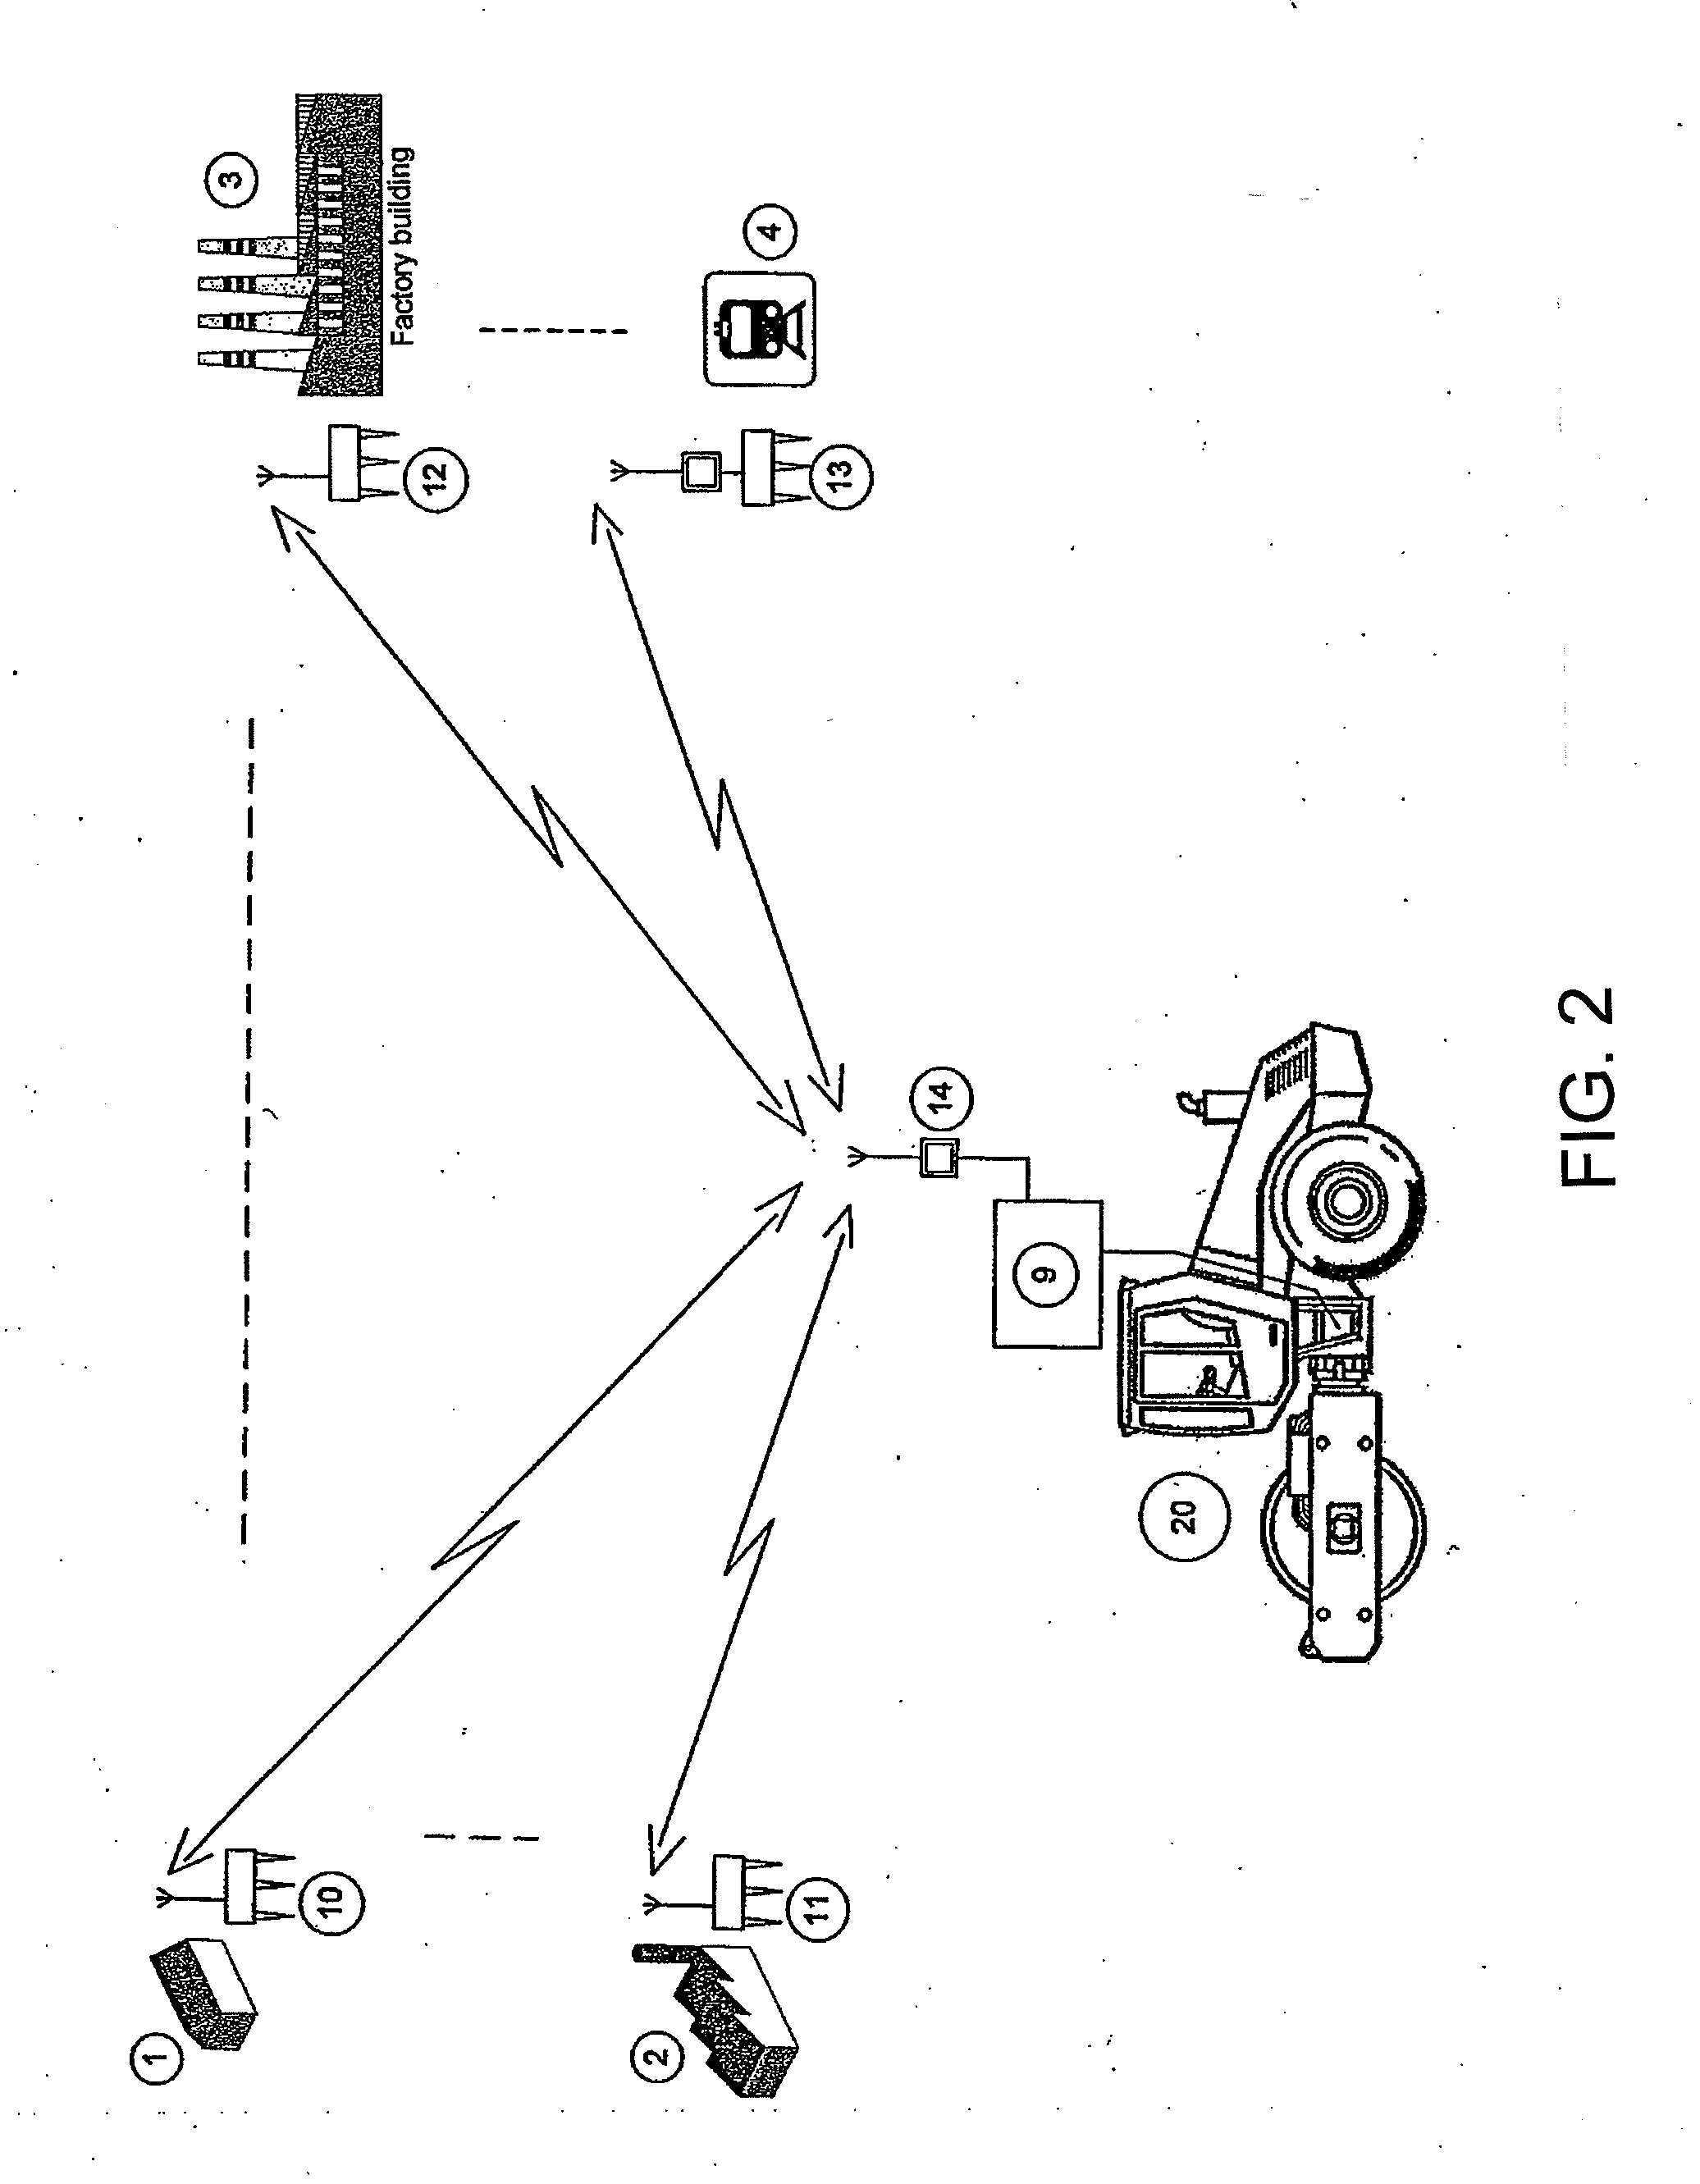 Method and system for controlling compaction machines